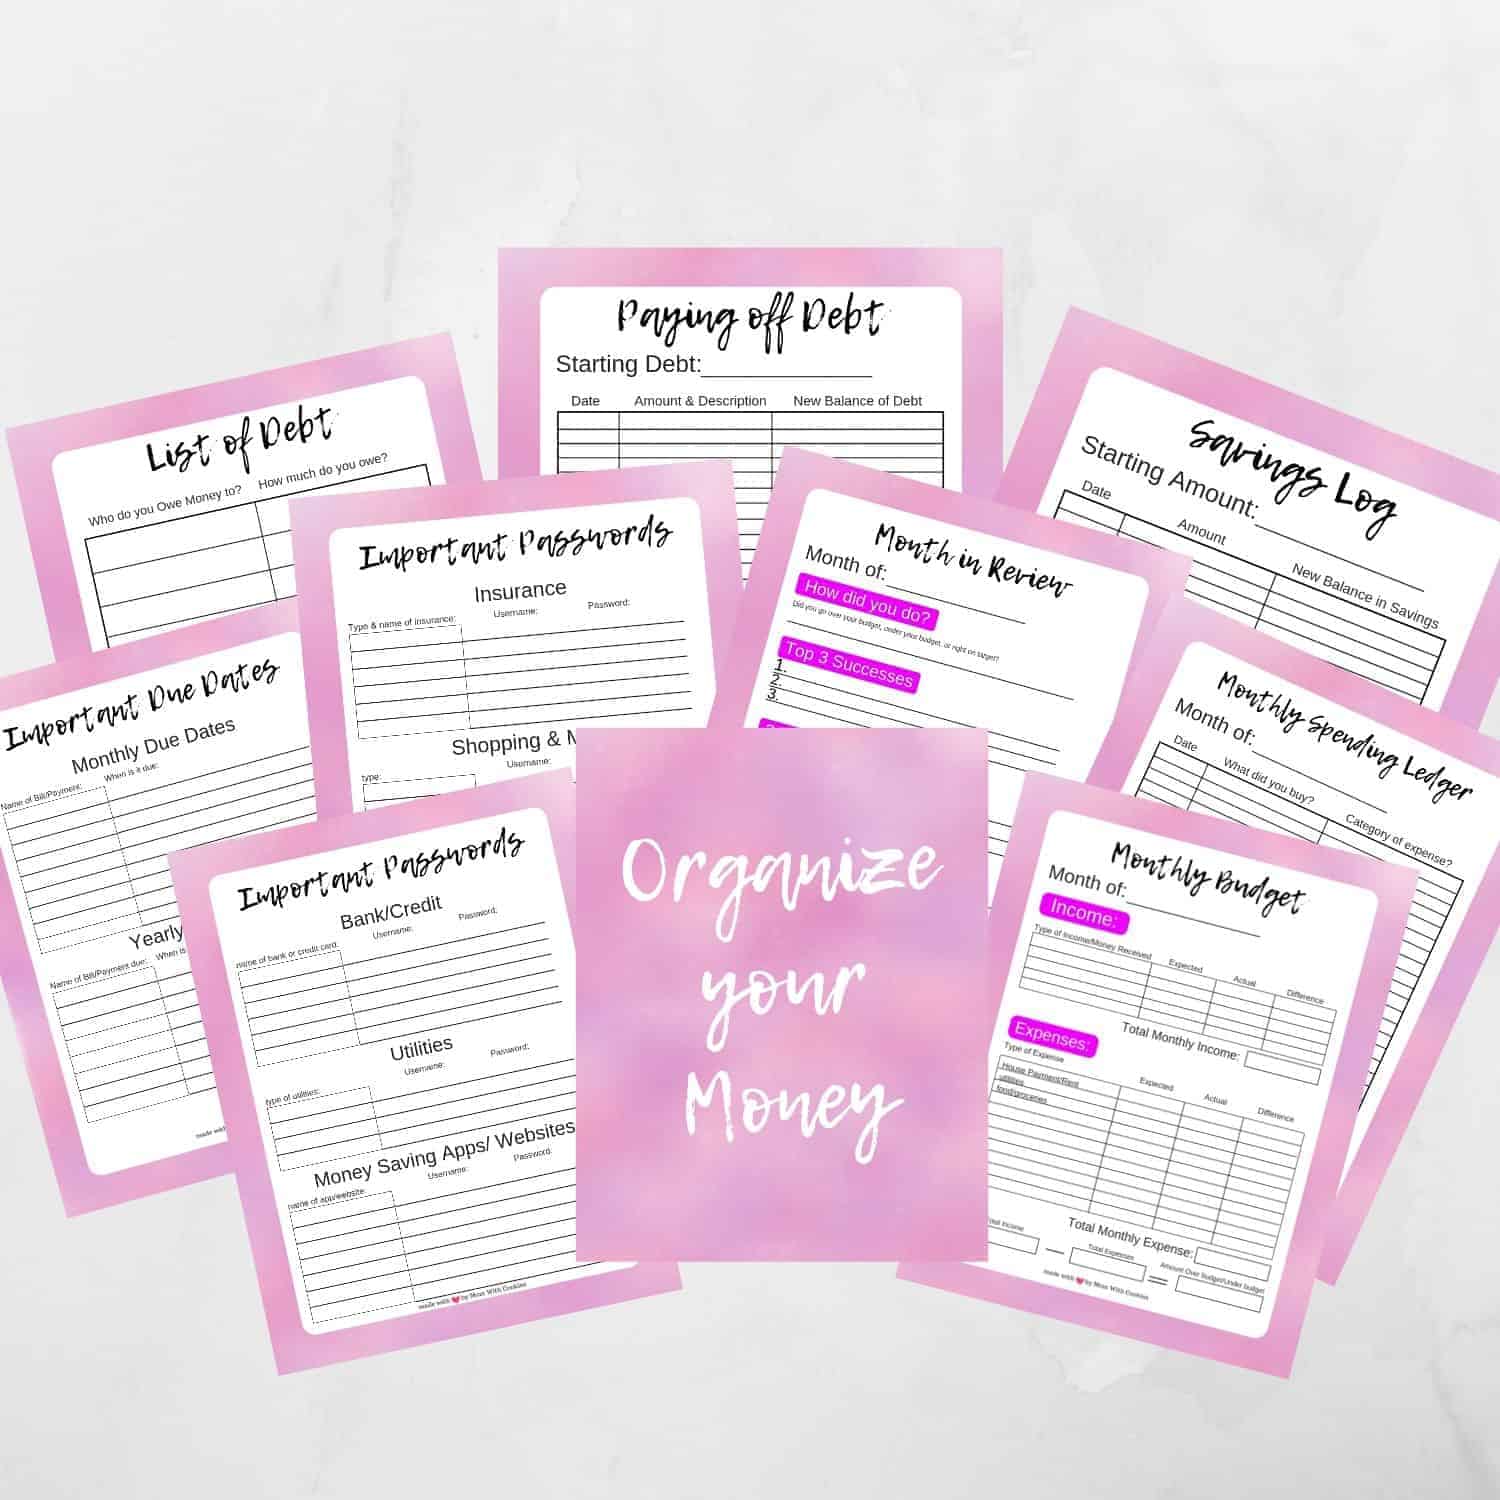 10 pages of printables to organize your money